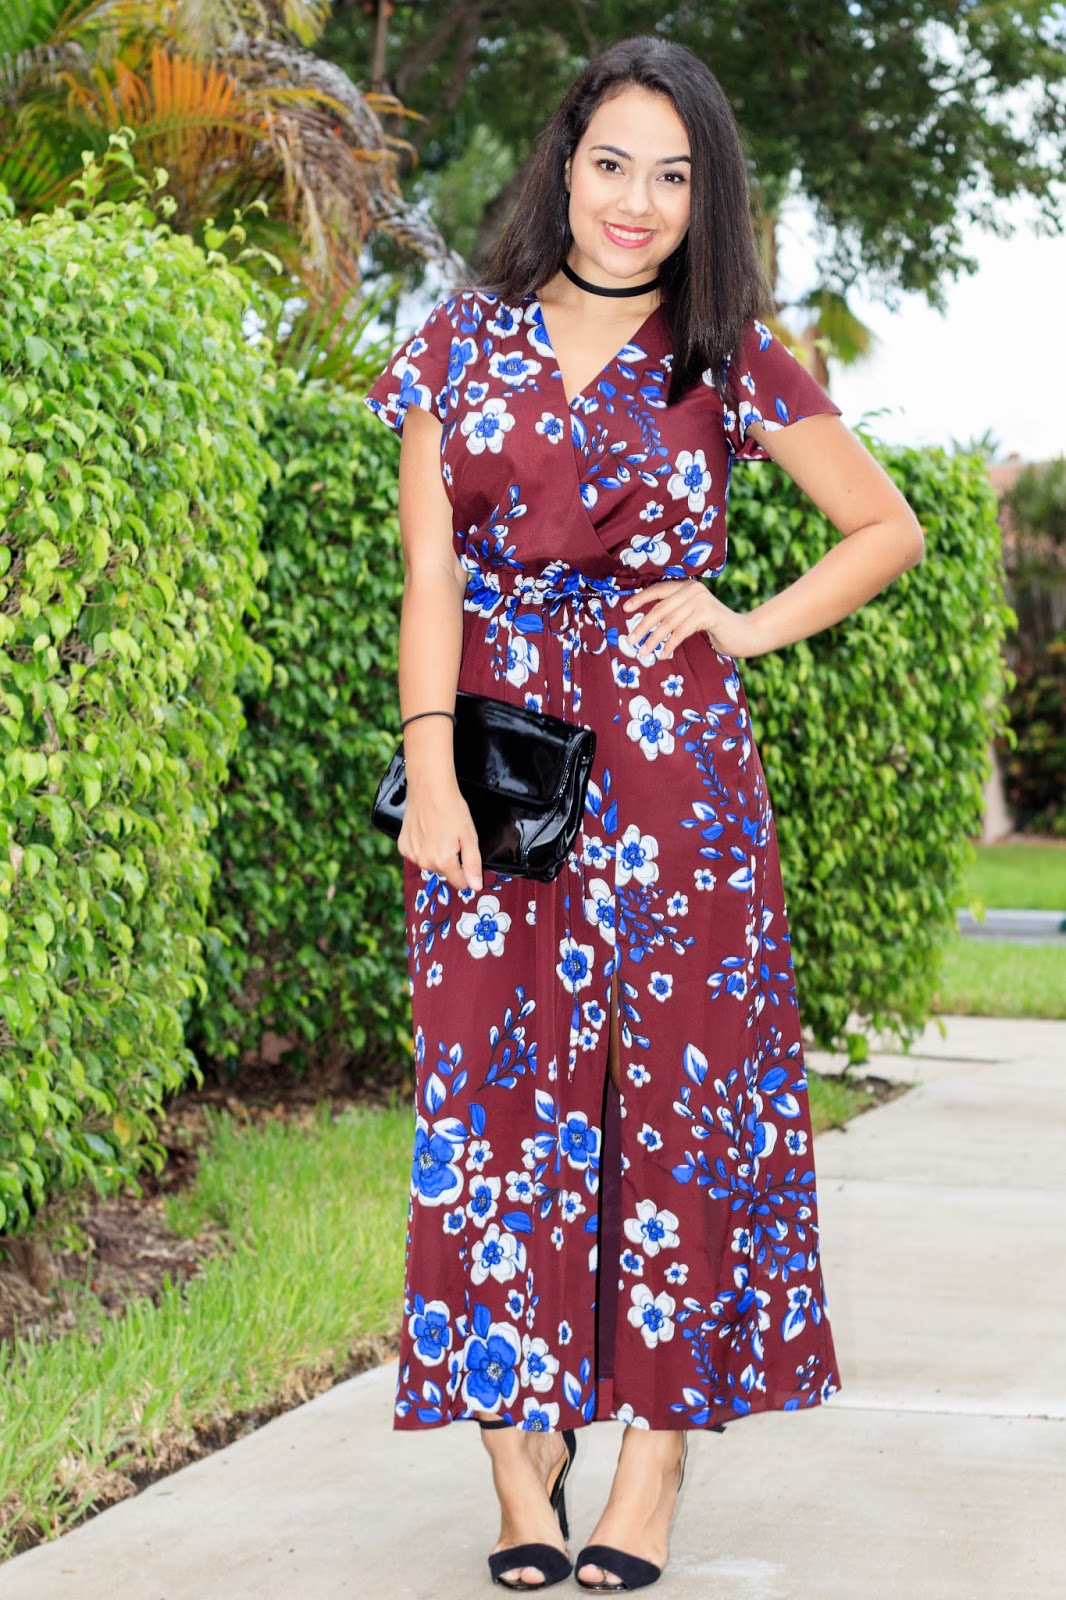 Stylishly In Love: Fall Maxi Dress Style